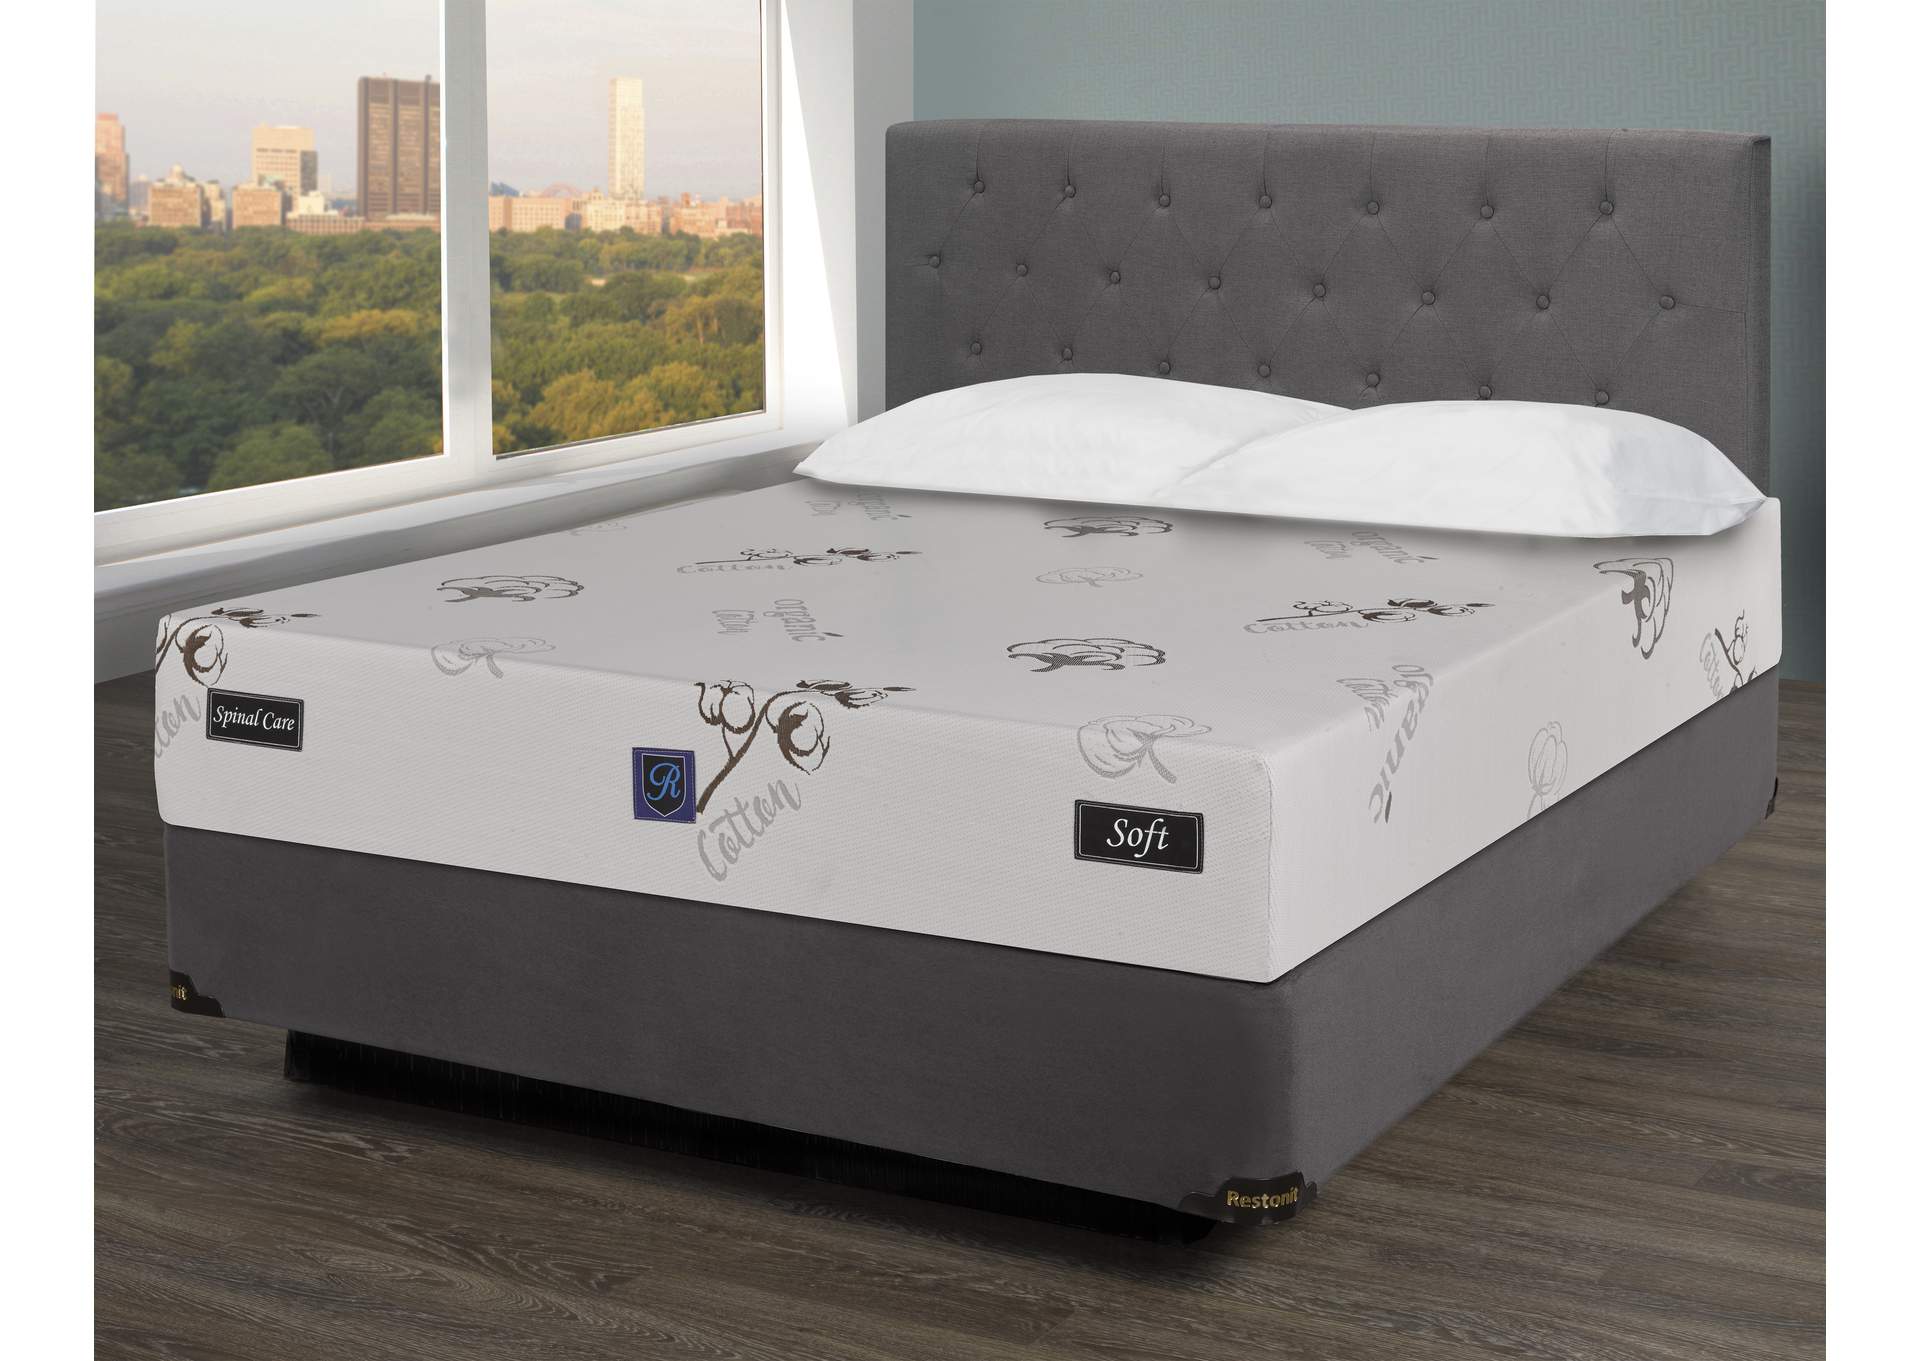 Spinal Care Full Mattress - 10",Galaxy Home Furniture